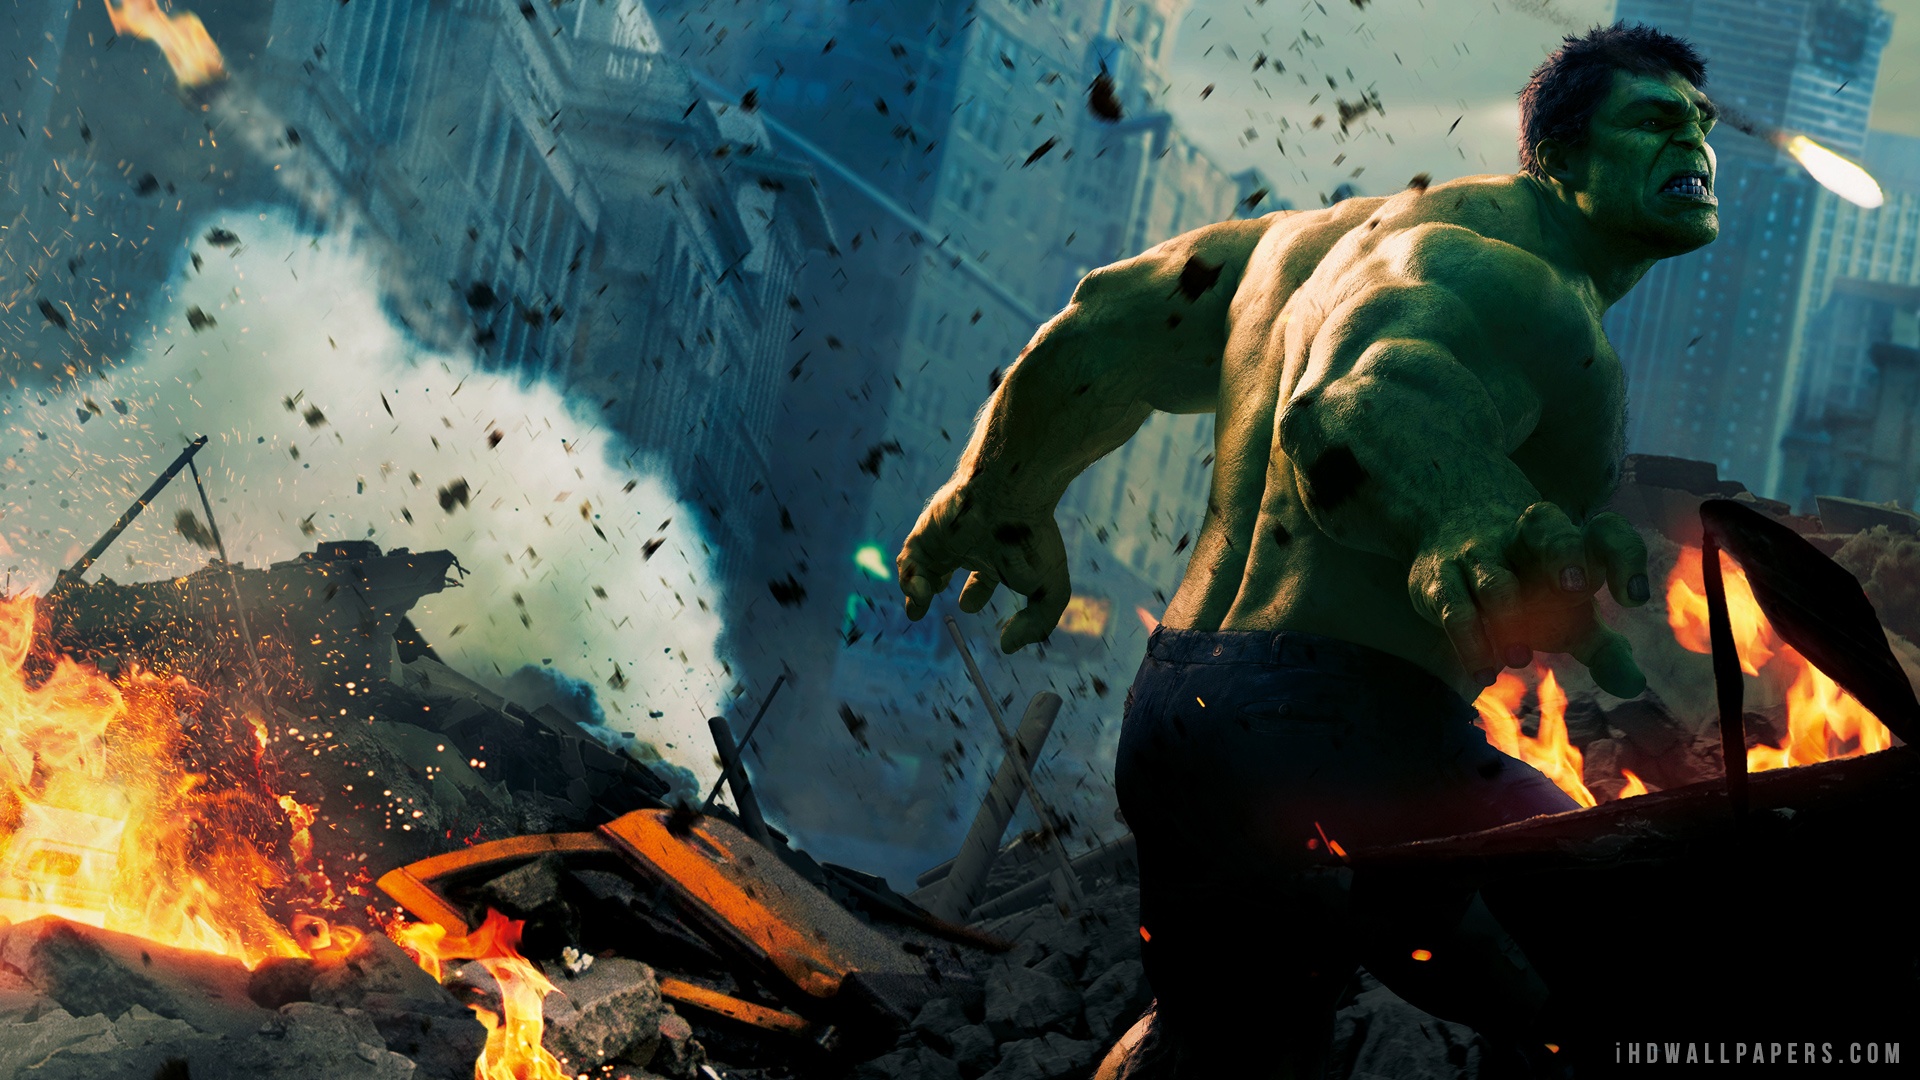 Get Gorgeous Hulk Action Avengers Wallpaper Background In X HD